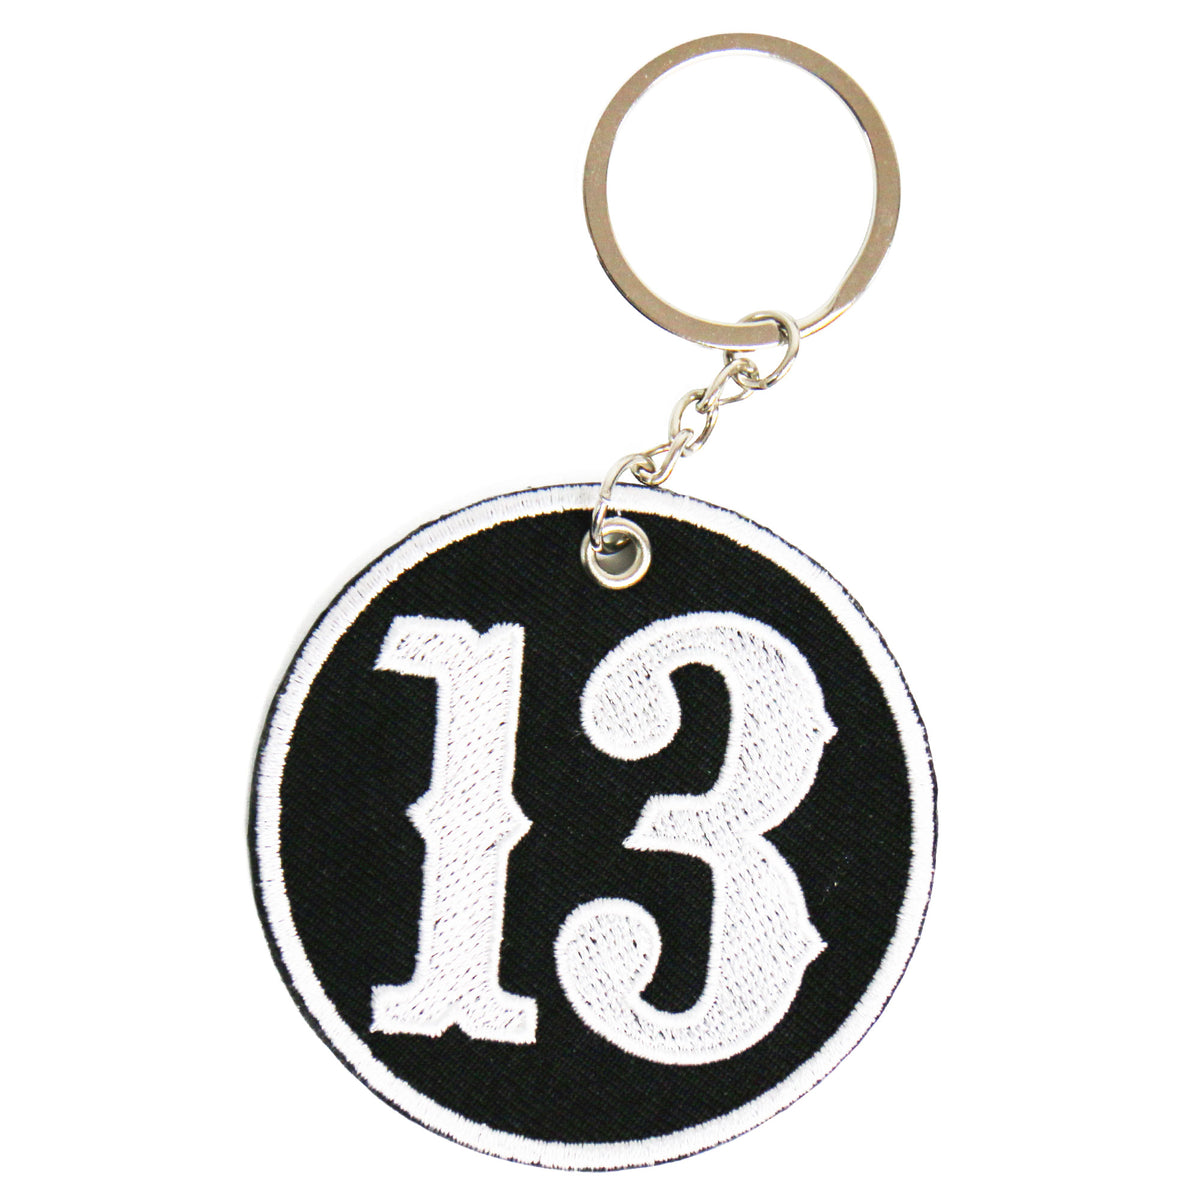 Hot Leathers KCH1043 Circle 13 Embroidered Key Chain